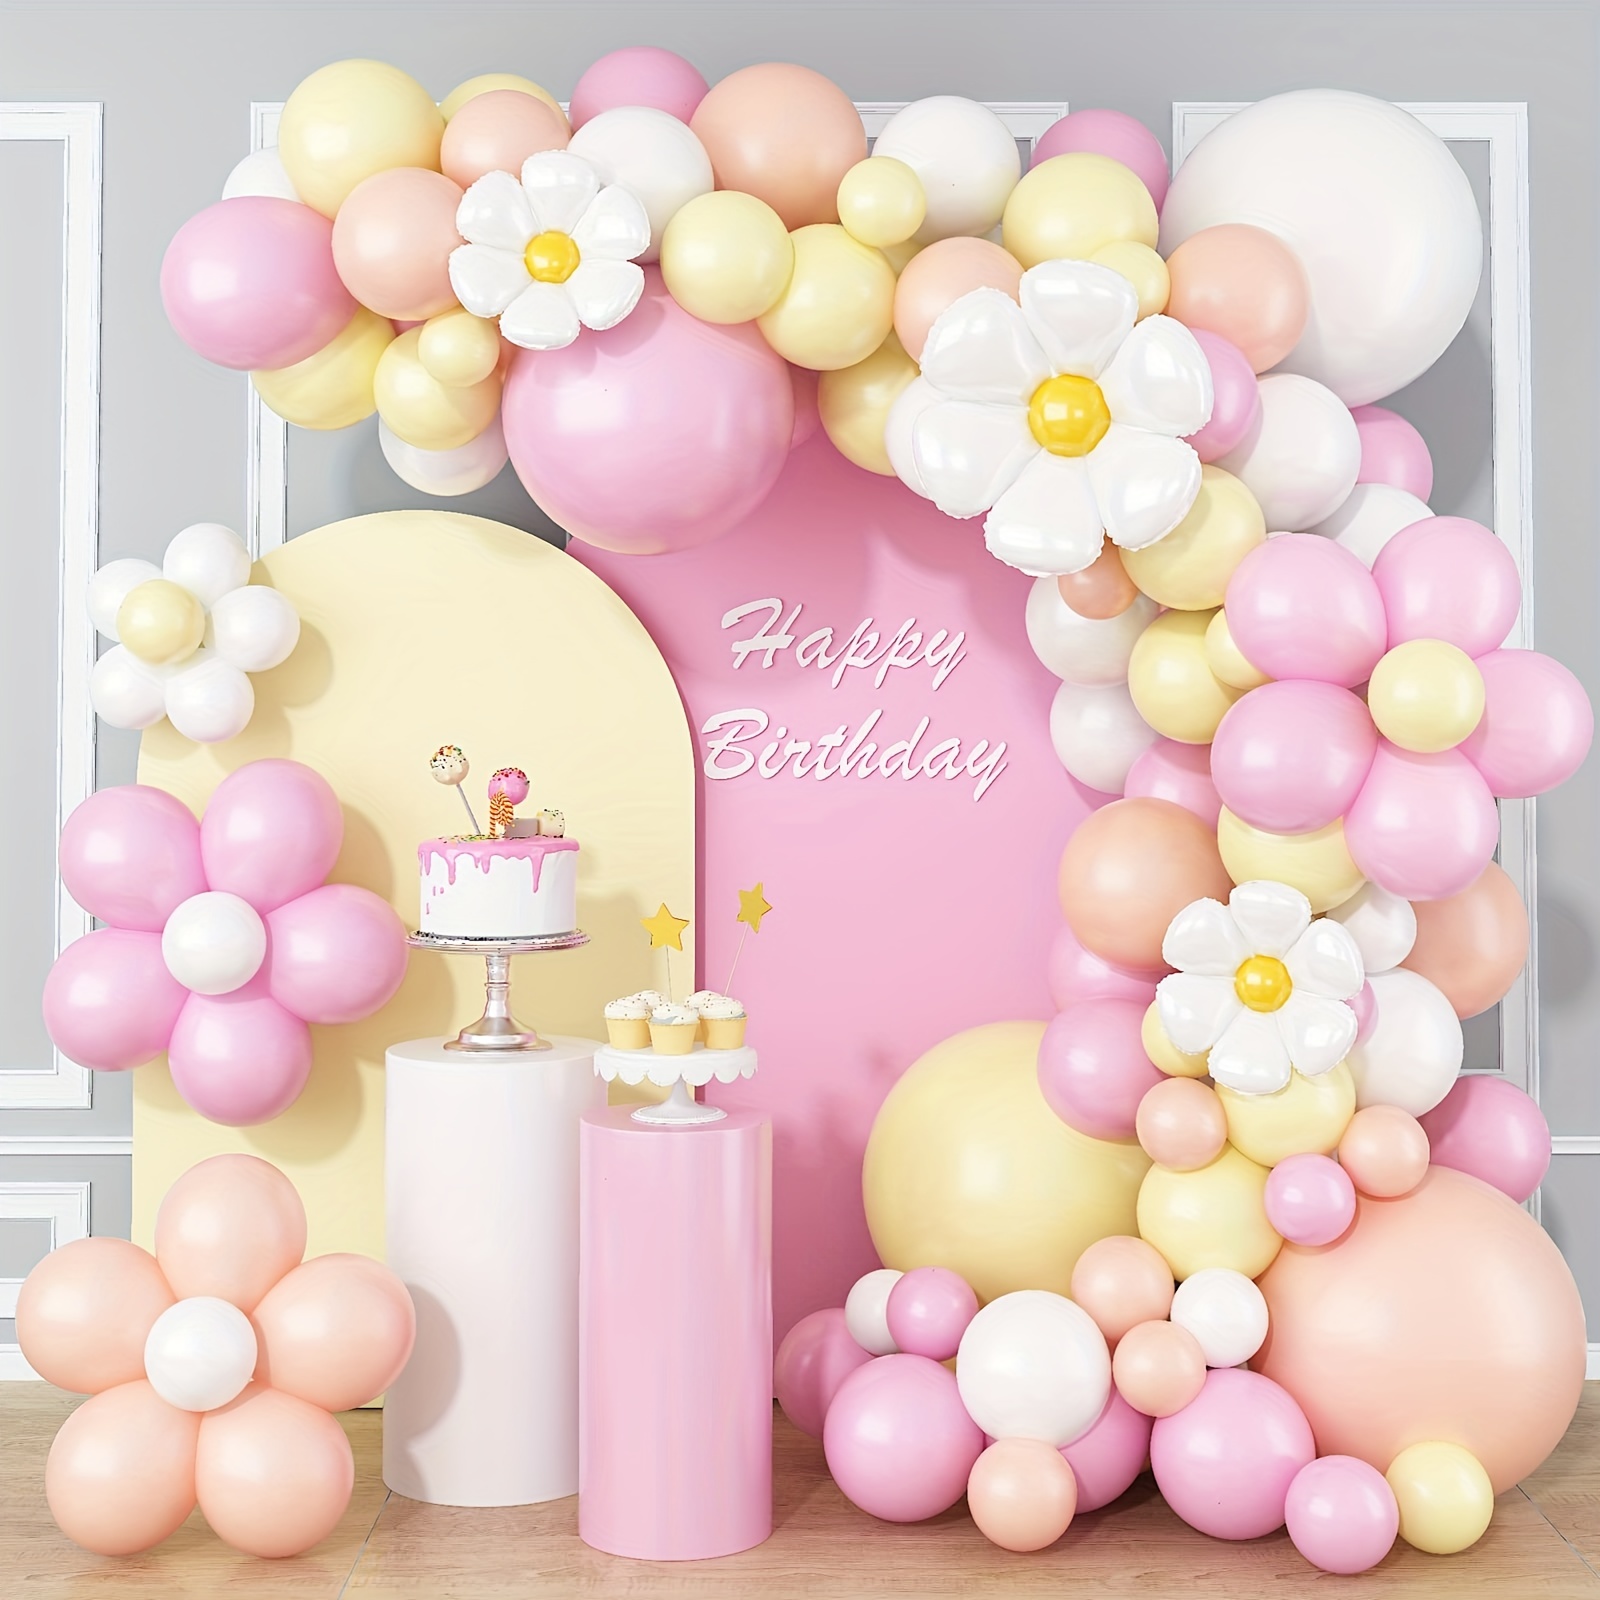 Daisy Balloons 30 Inch Flower Shaped Balloon Kit Colorful Daisy Themed  Decorations Big Flowers Spring Time Photoshoot Floral Birthday Groovy Party